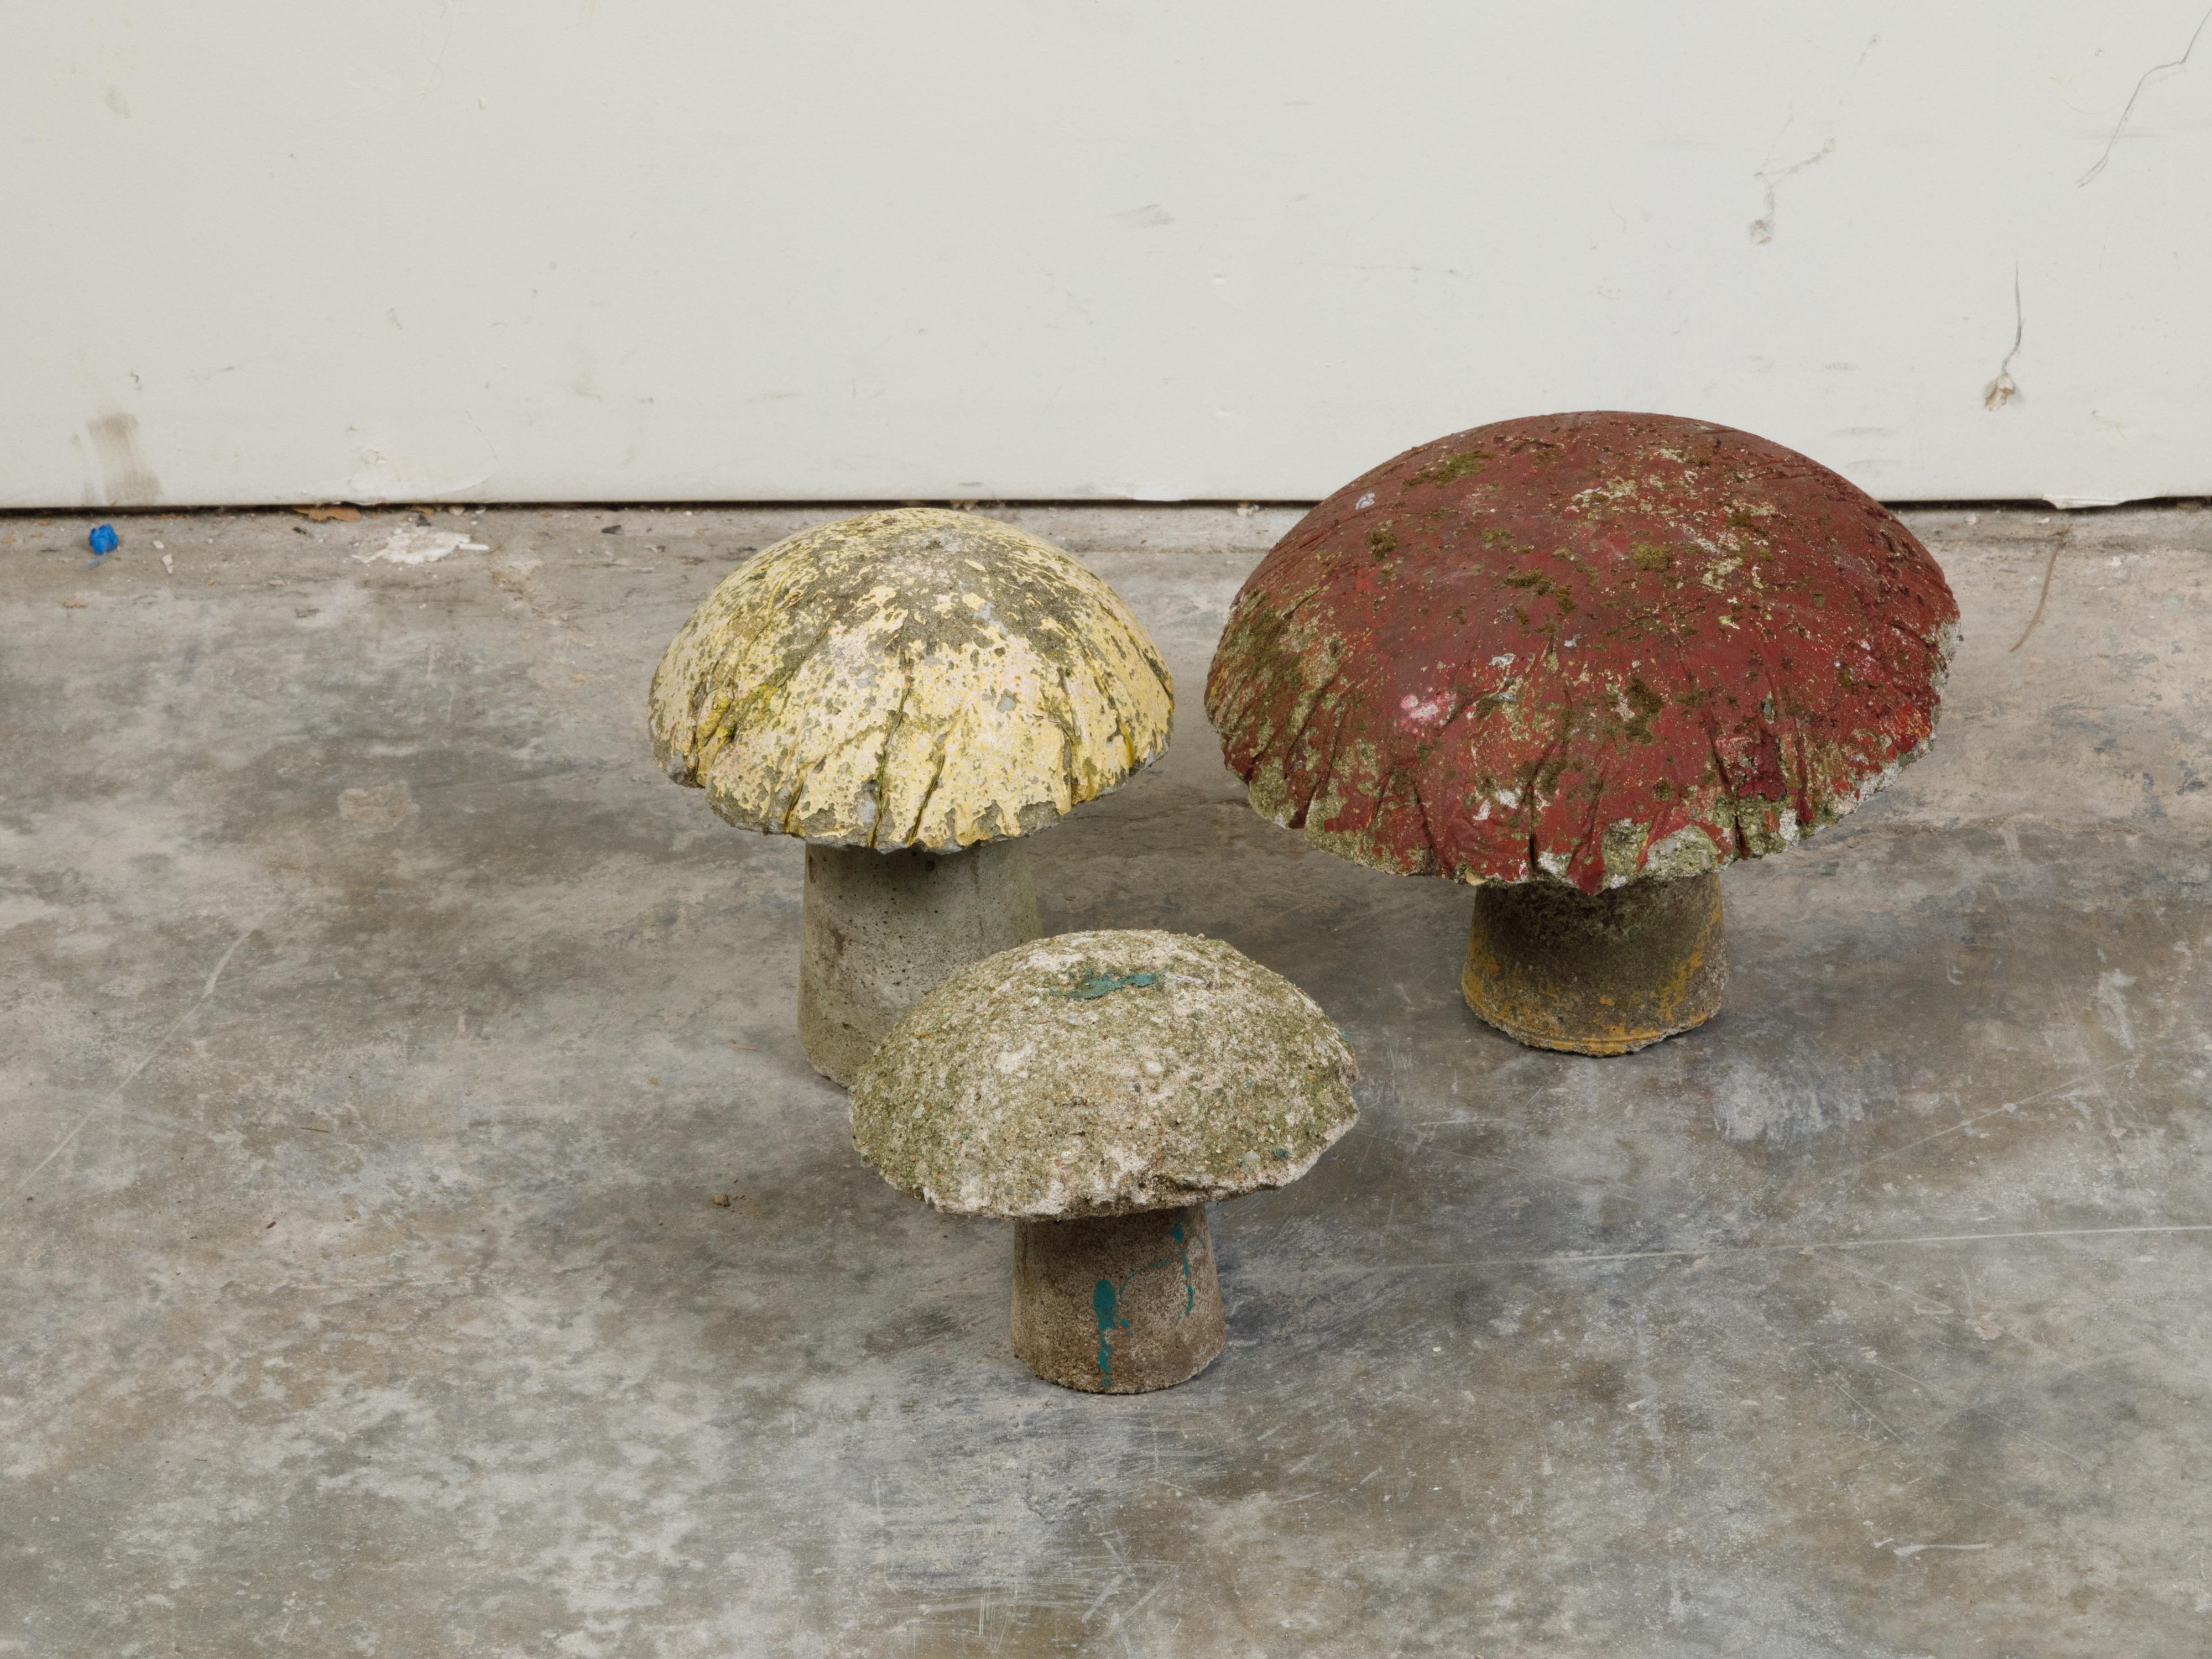 A set of three vintage American concrete mushrooms from the mid-20th century, with nicely worn patina. Made in the USA during the mid-century period, this set of three concrete mushrooms boasts a nicely weathered appearance, with yellow, red and